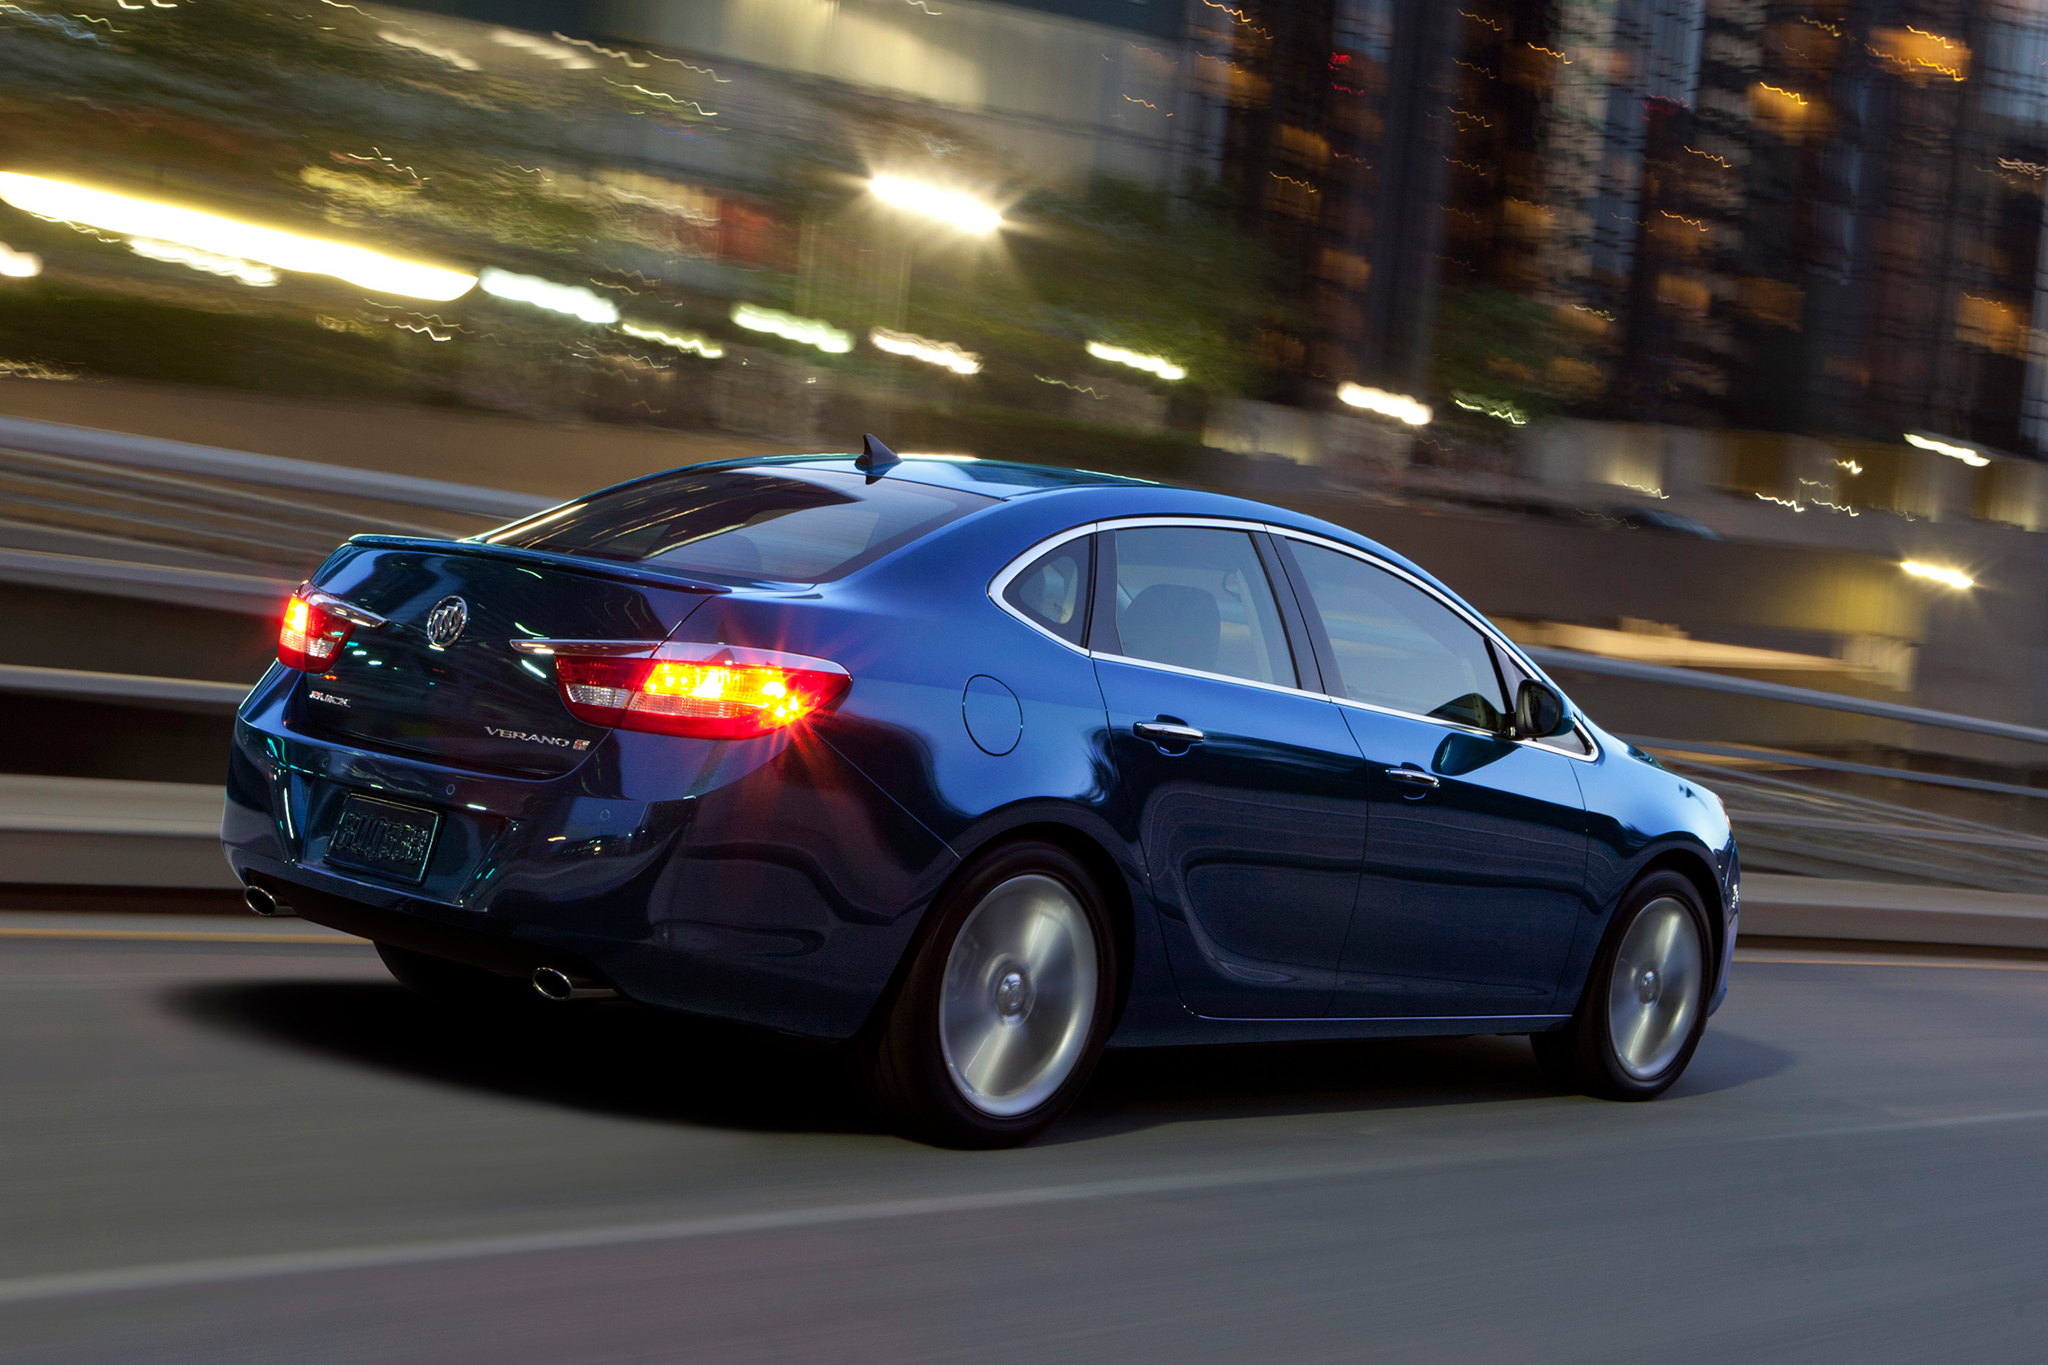 Amazing Buick Verano Turbo Pictures & Backgrounds